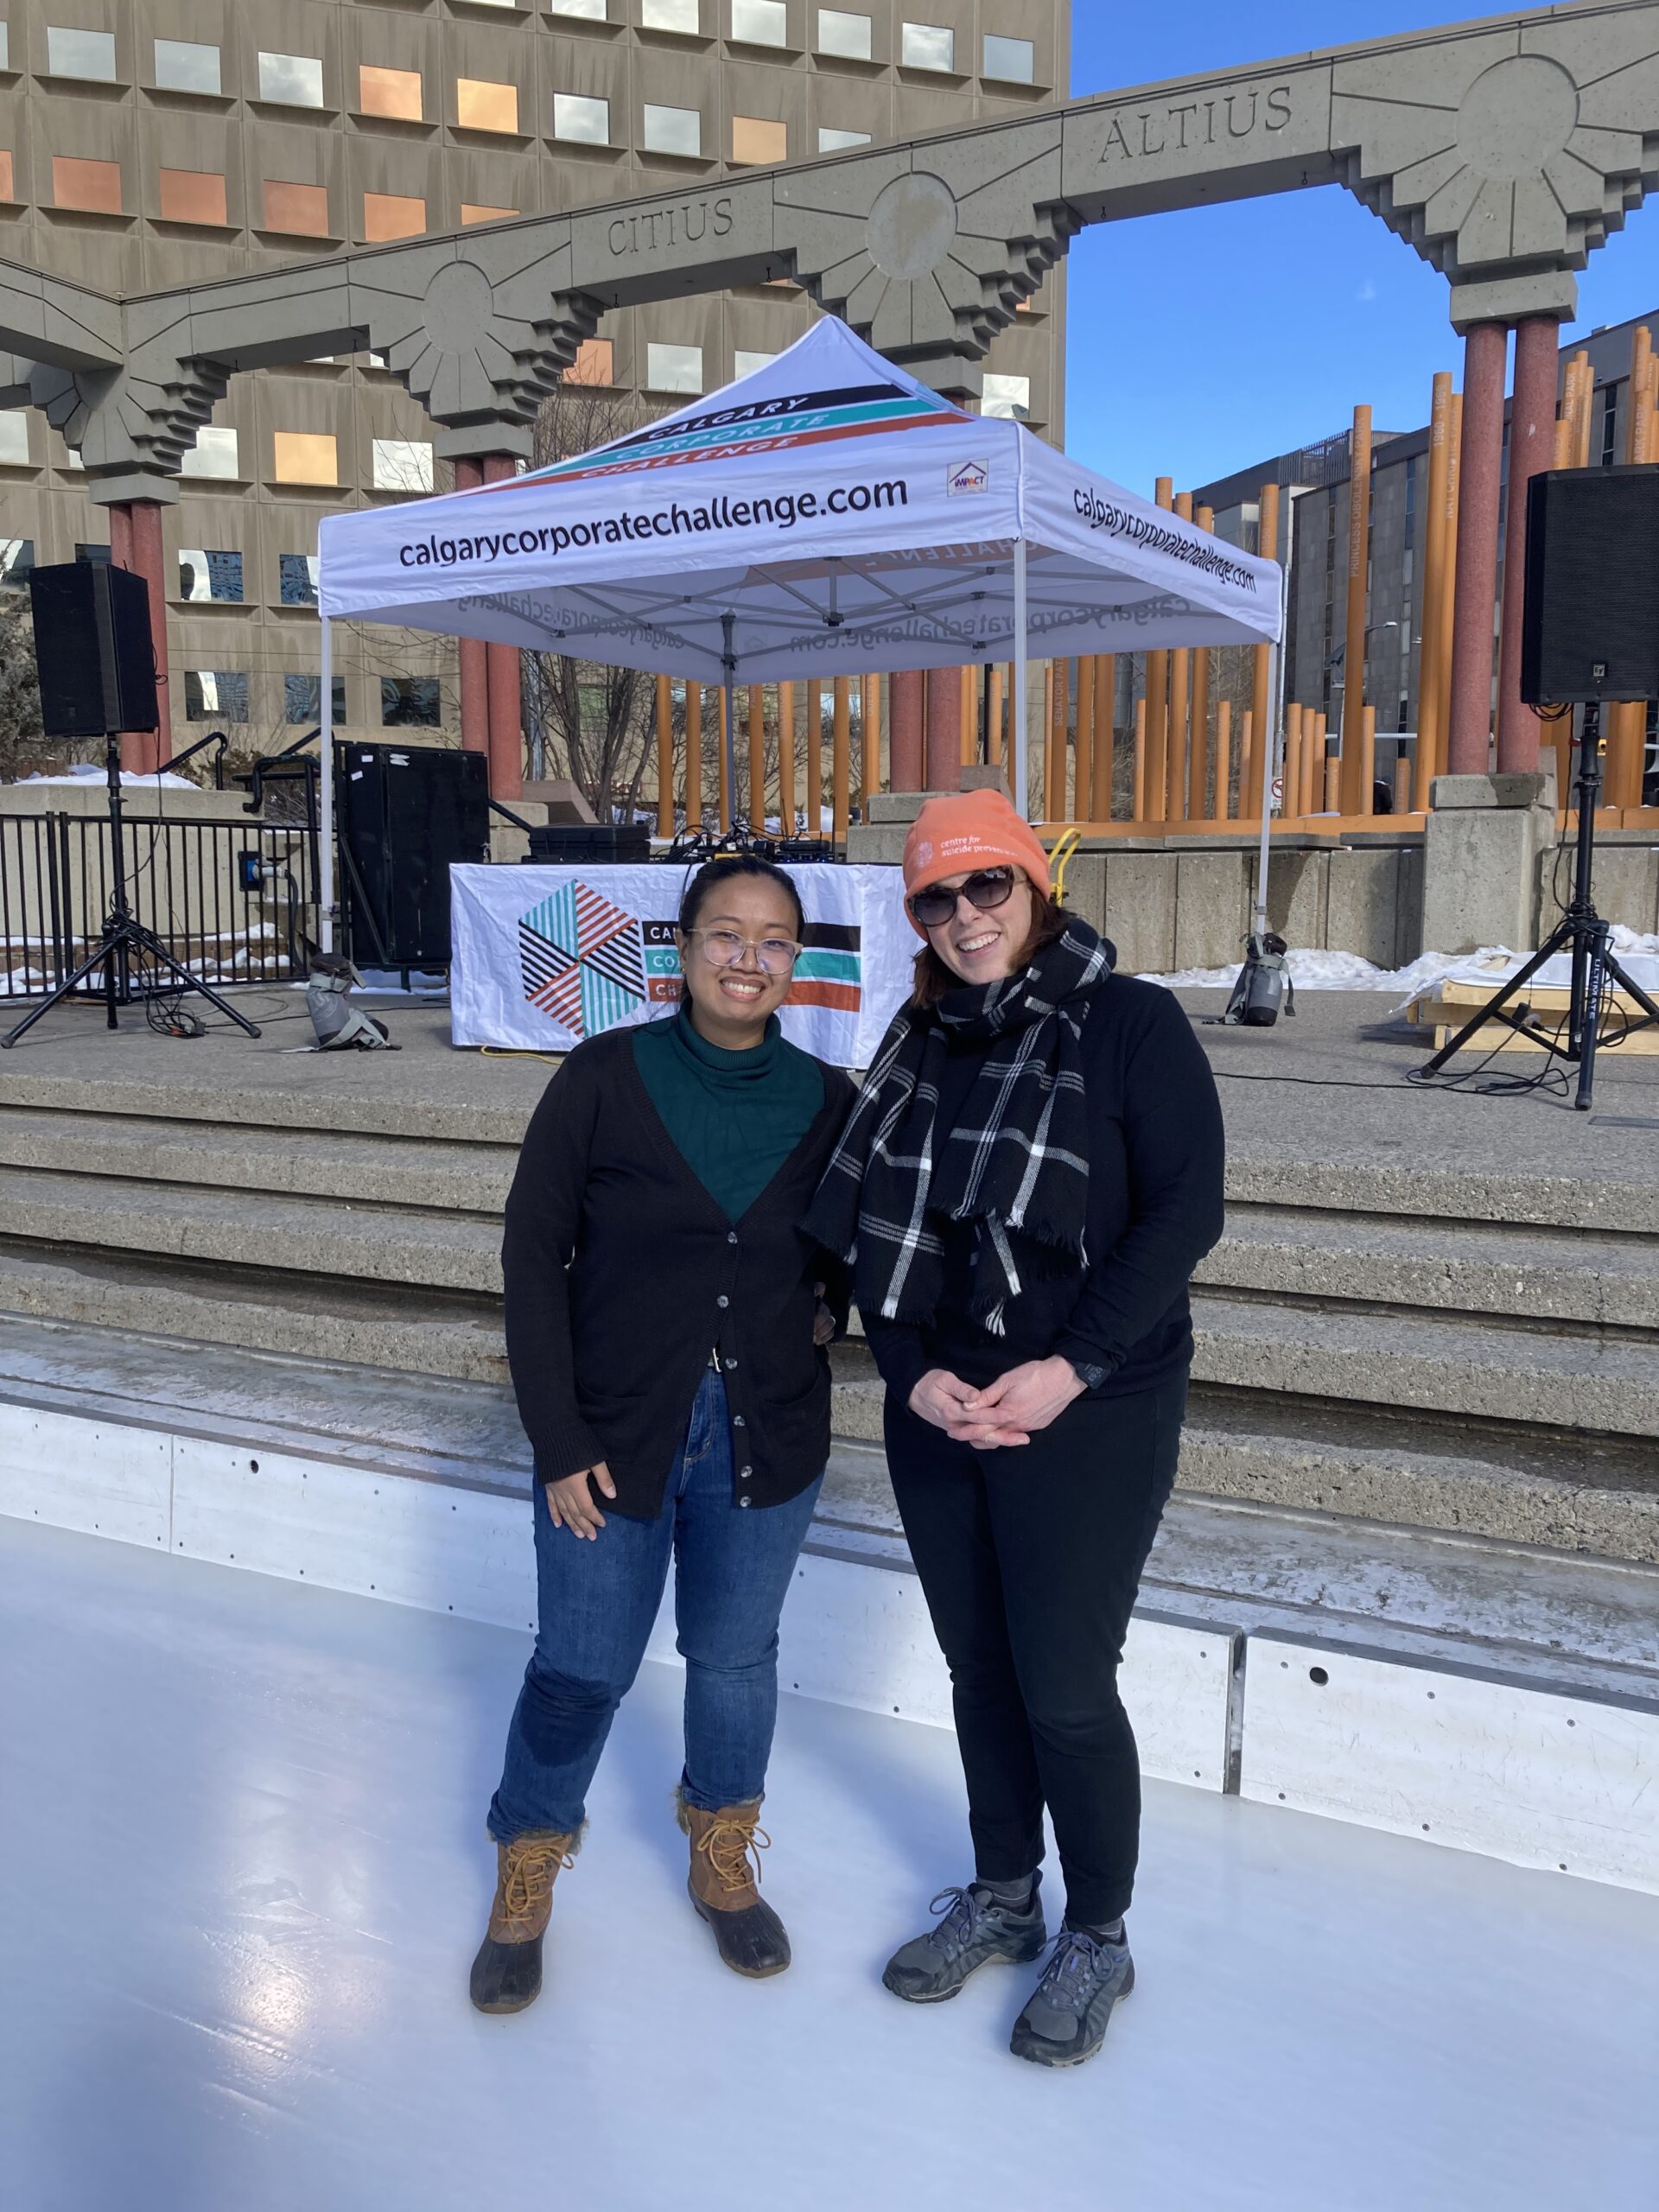 Freshia Corpus (left) and Hilary Sirman (right) at the human bonspiel event for CCC at Olympic Plaza.